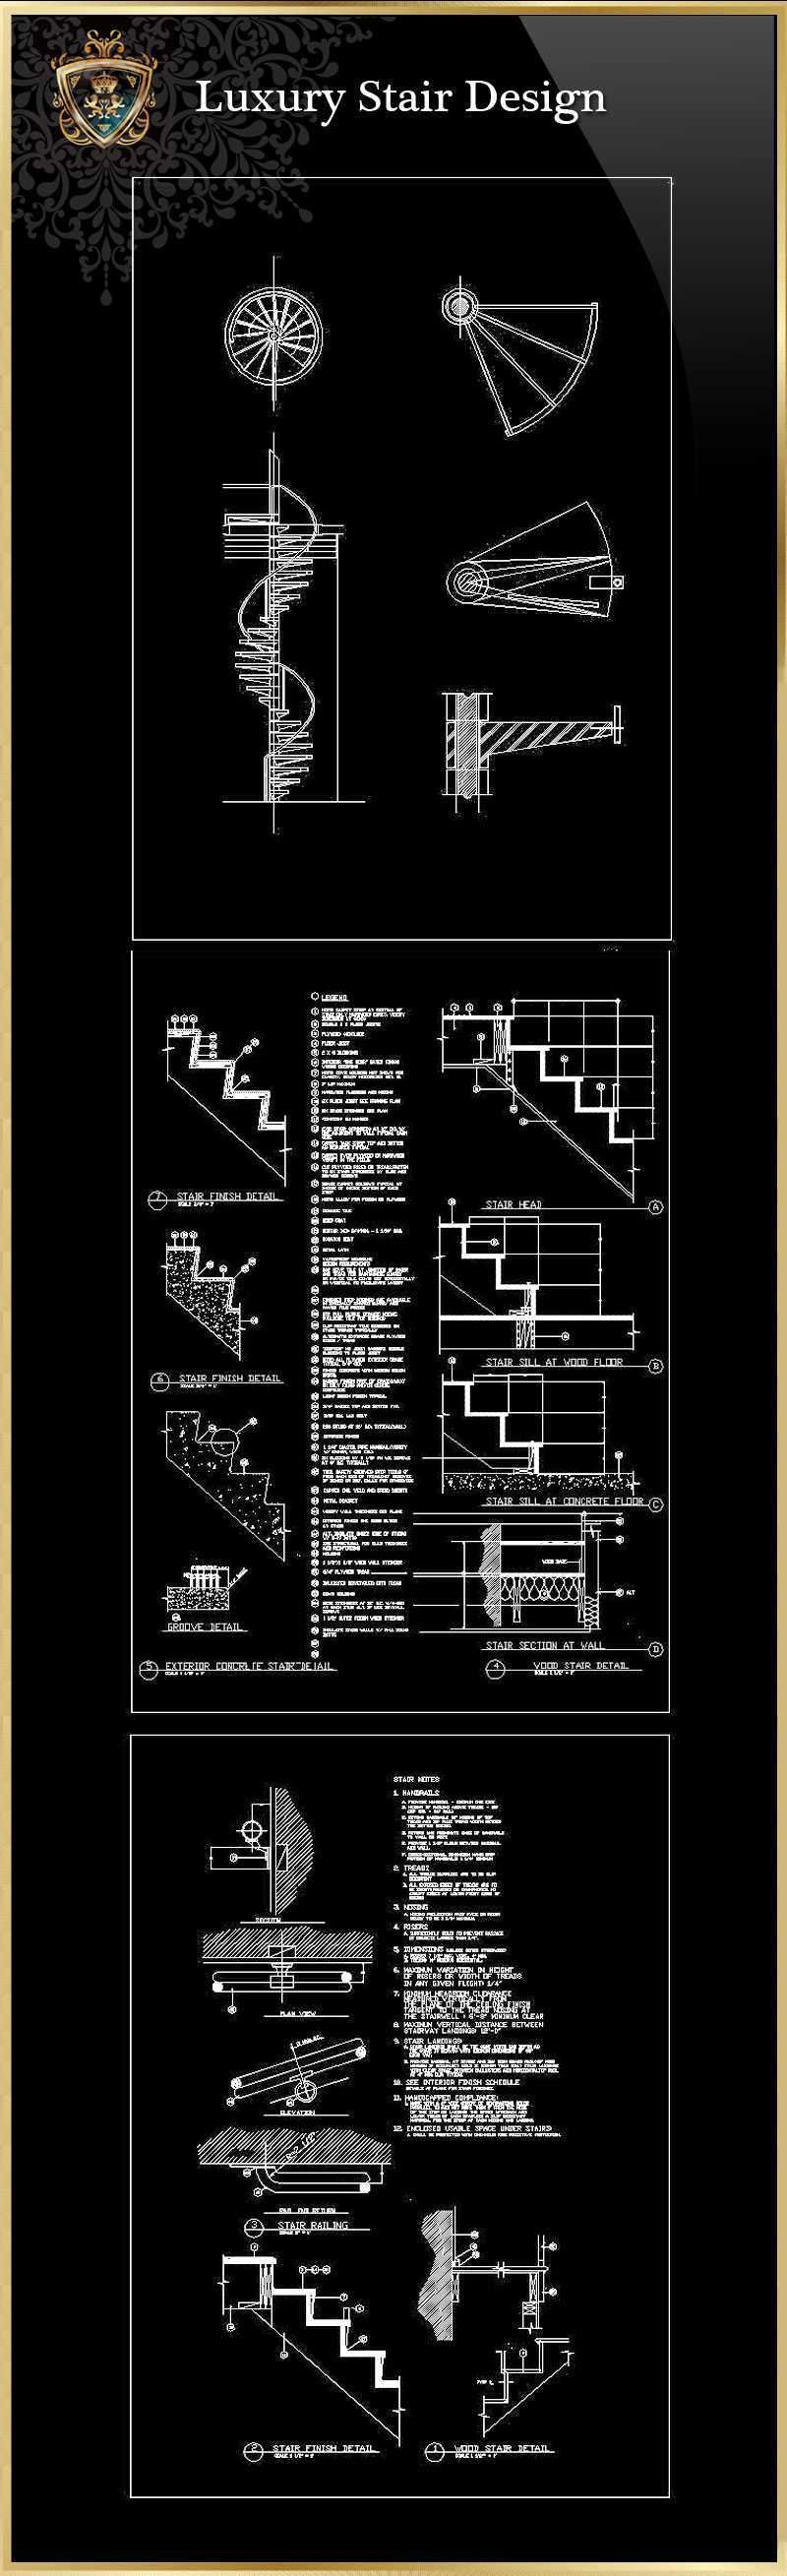 ★【Luxury Stair Design】Download Luxury Architectural Design CAD Drawings--Over 20000+ High quality CAD Blocks and Drawings Download!